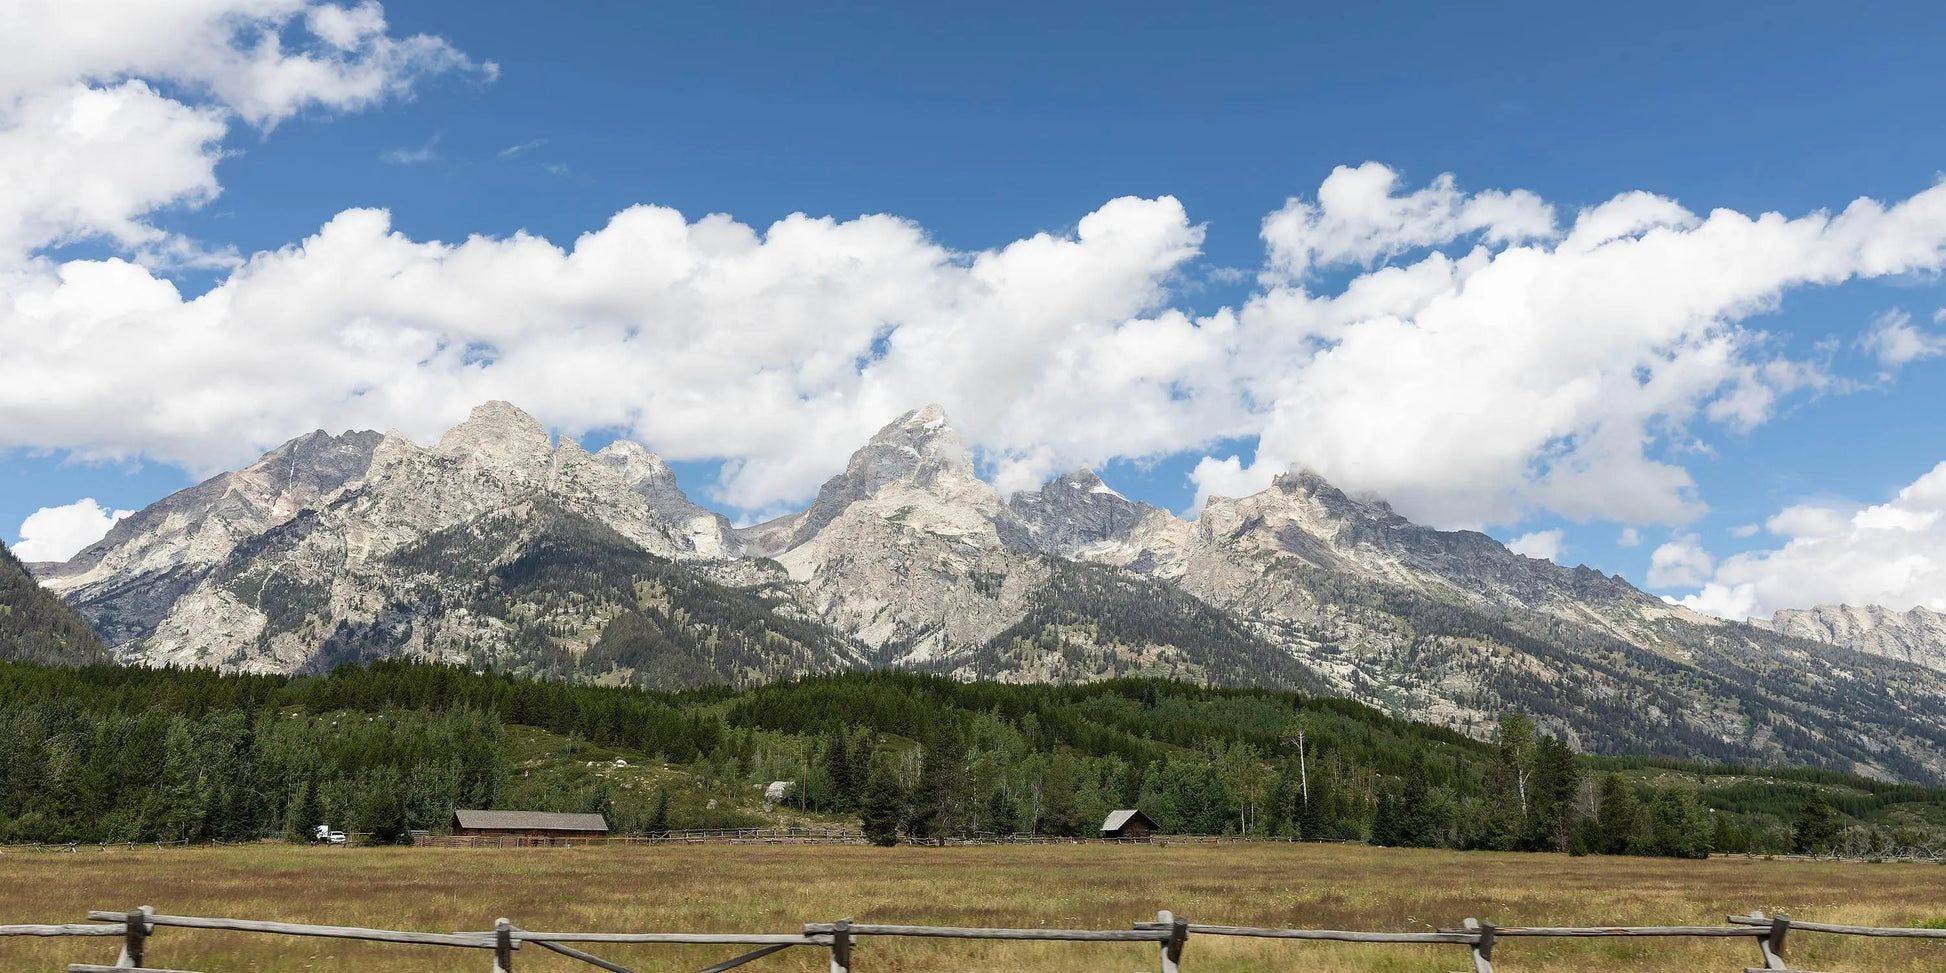 Teton Valley Wyoming landscape art with clouds in the sky and wooden fence lining the field